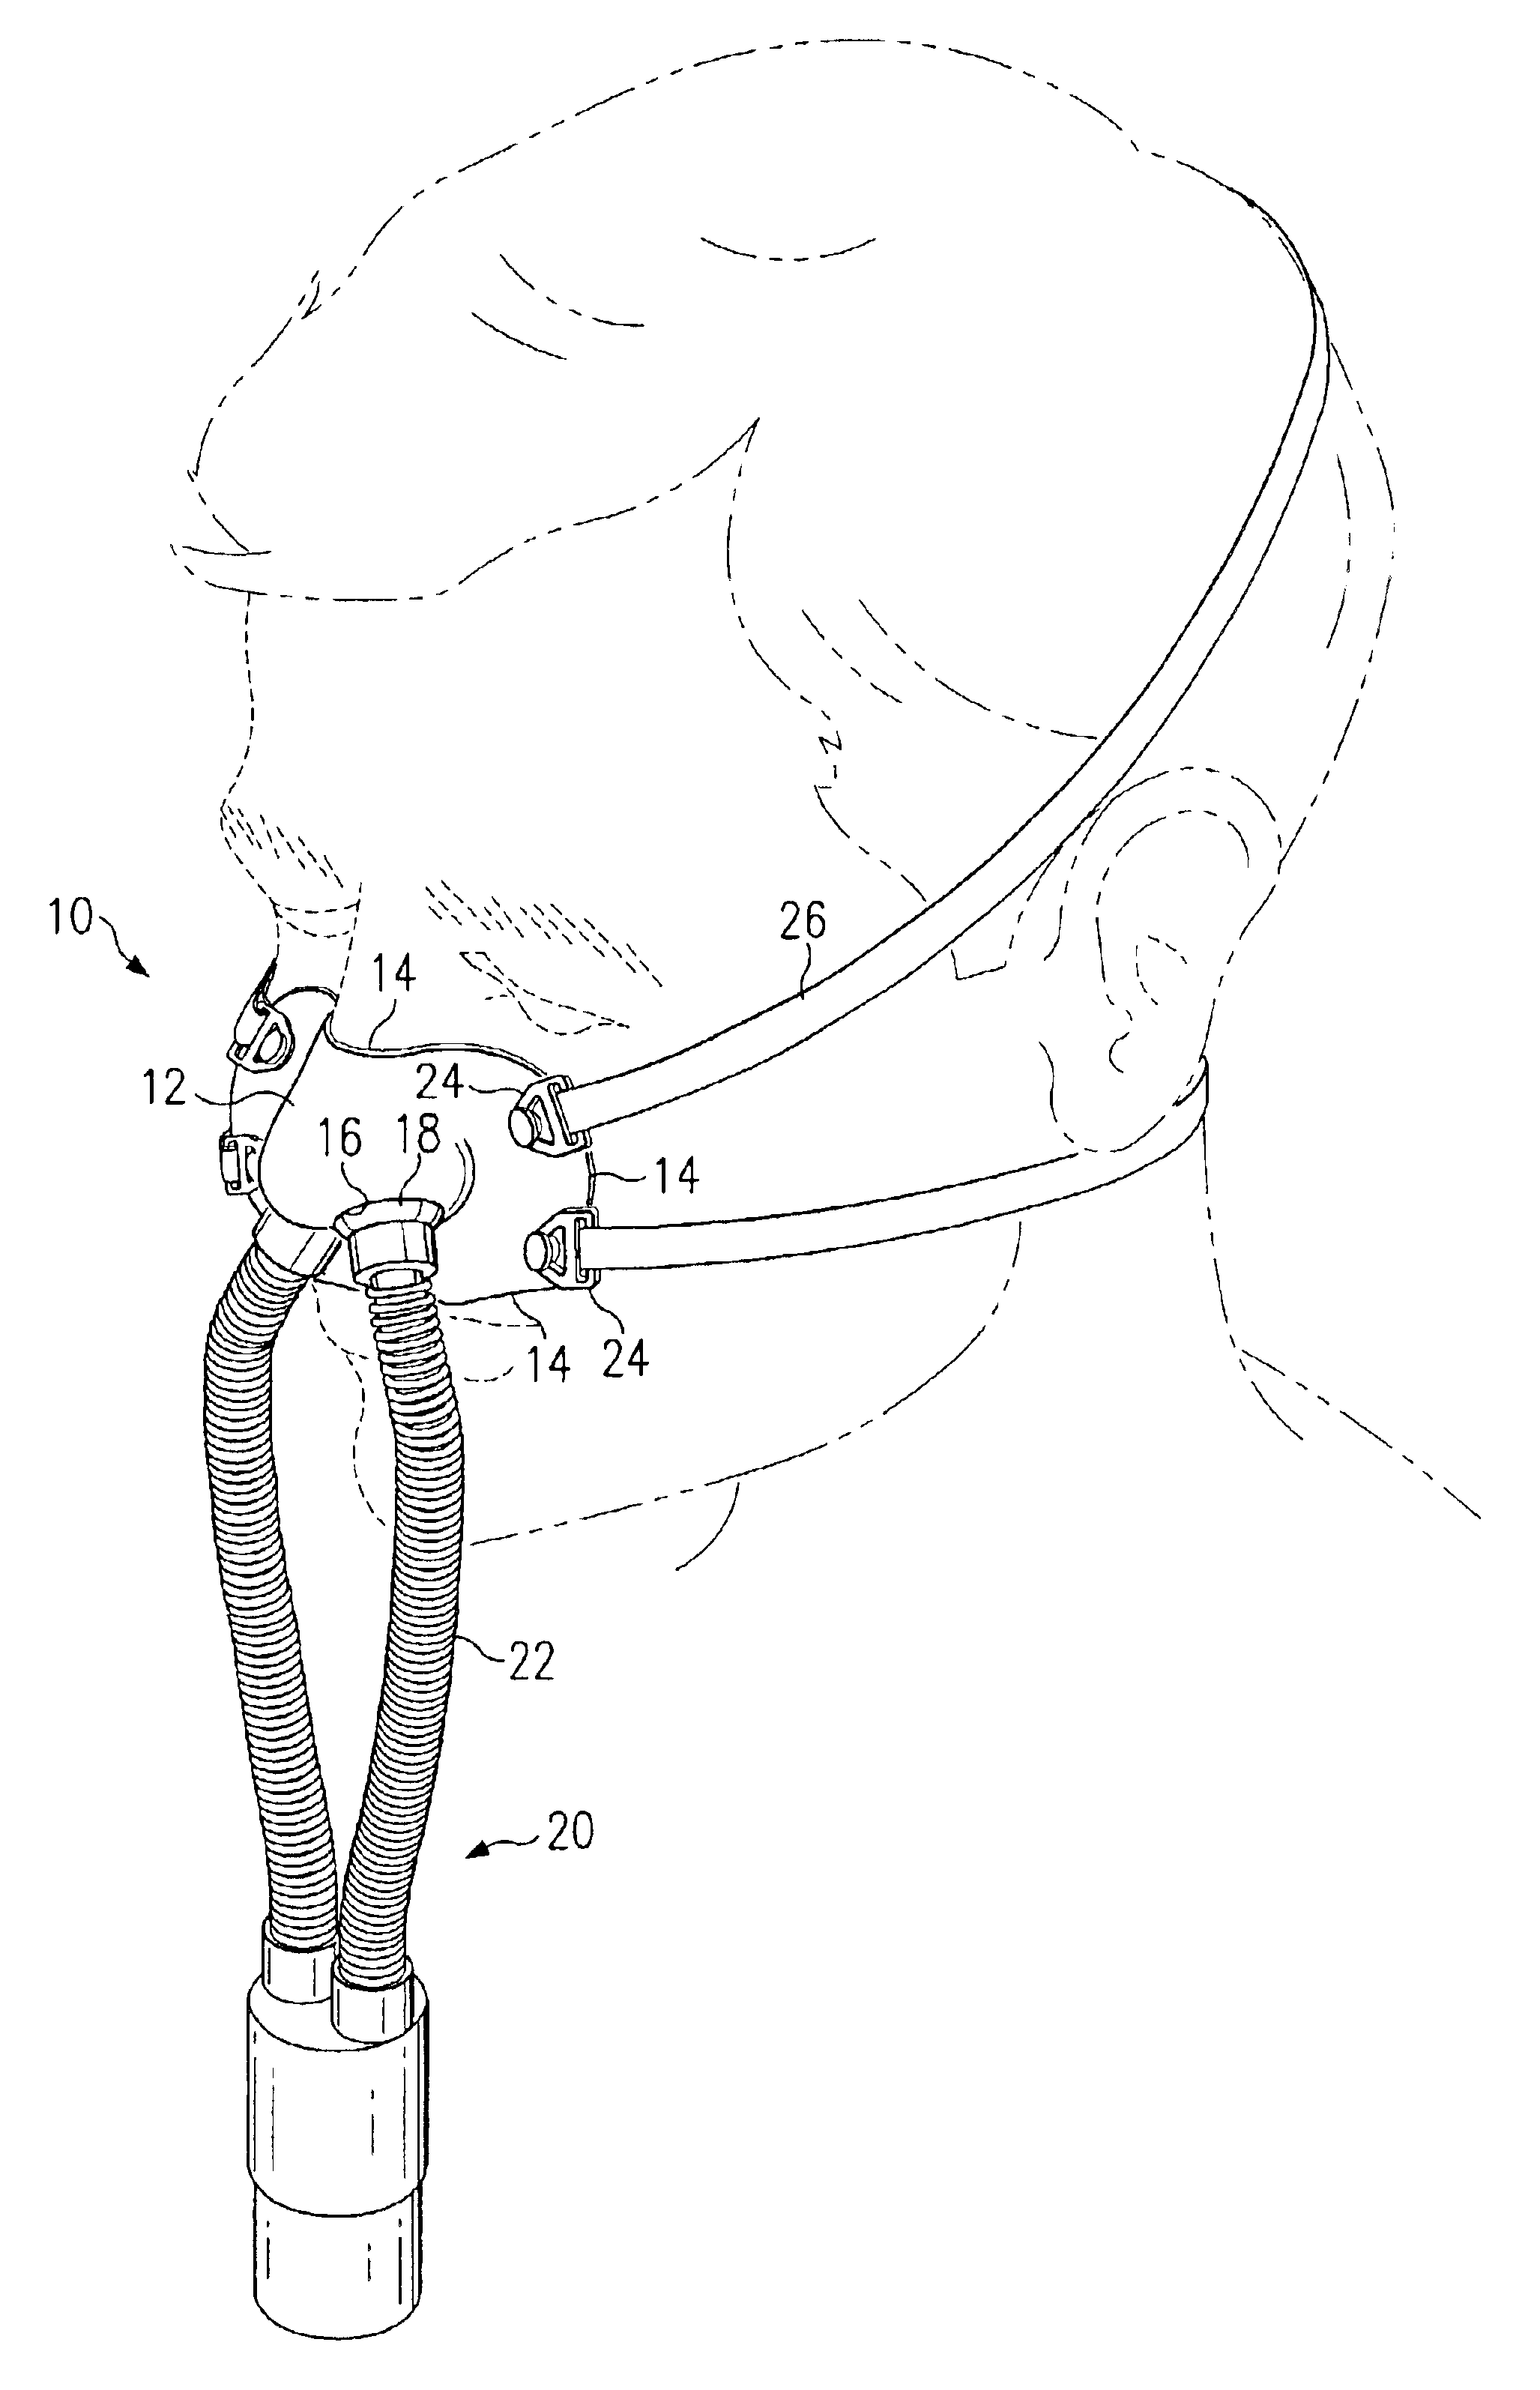 Custom fitted mask and method of forming same